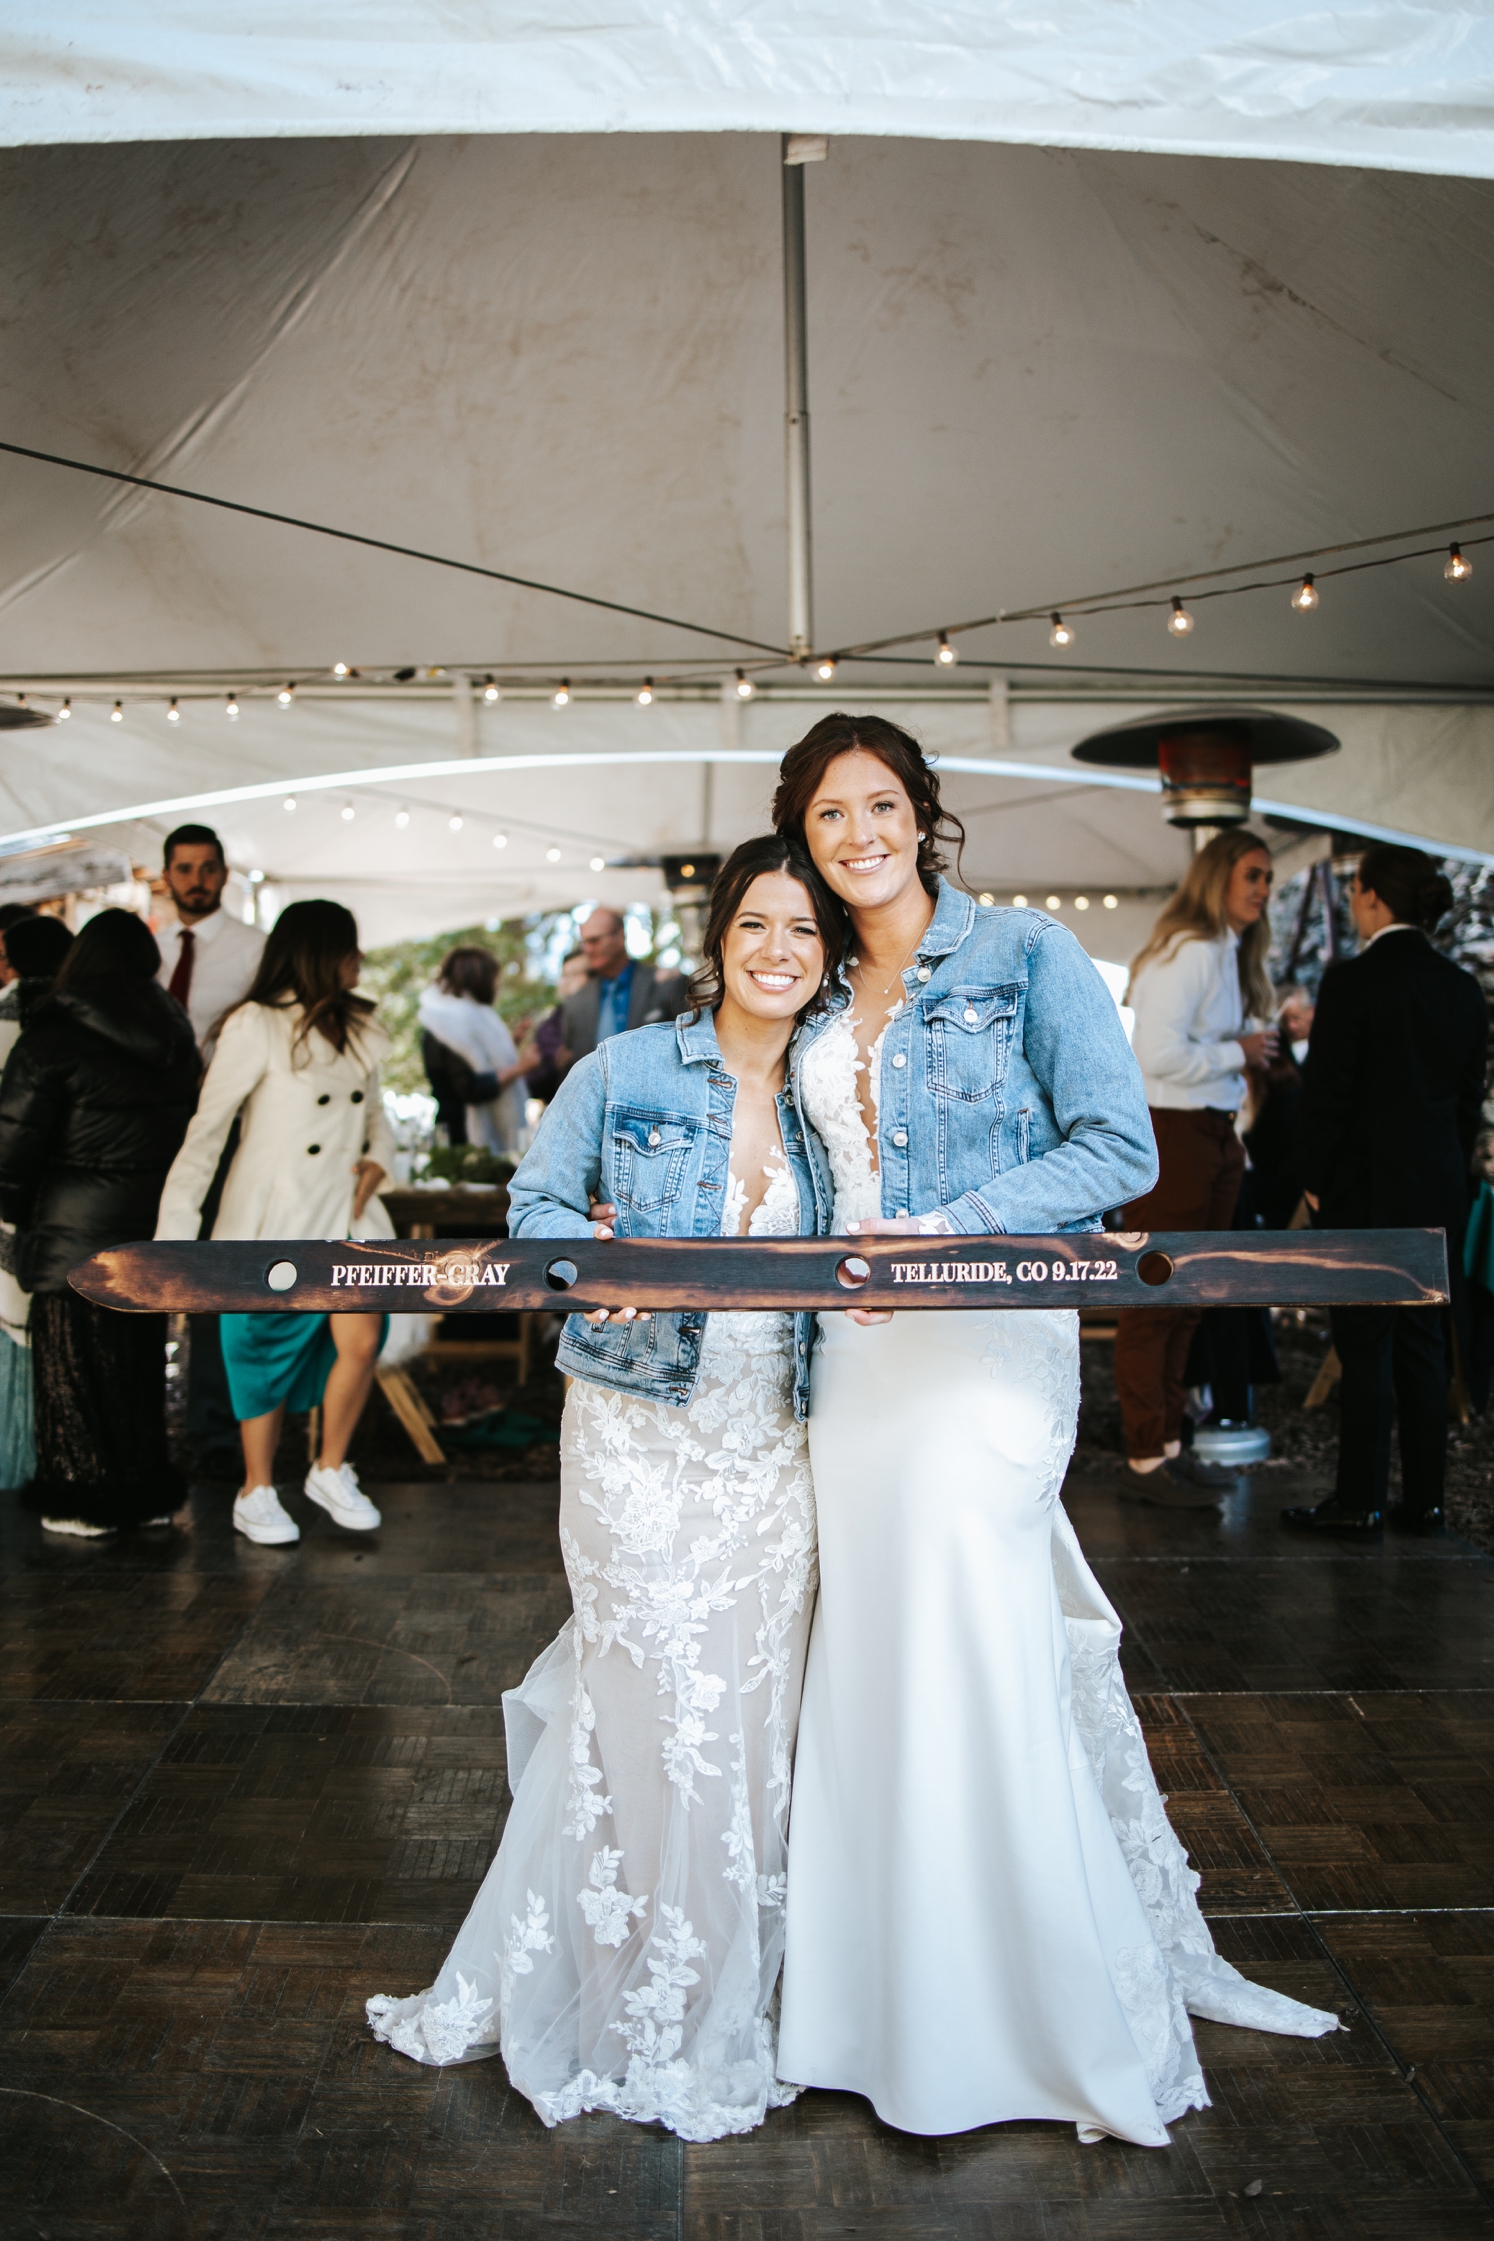 Brides posing with guest book shot ski | McArthur Weddings and Events